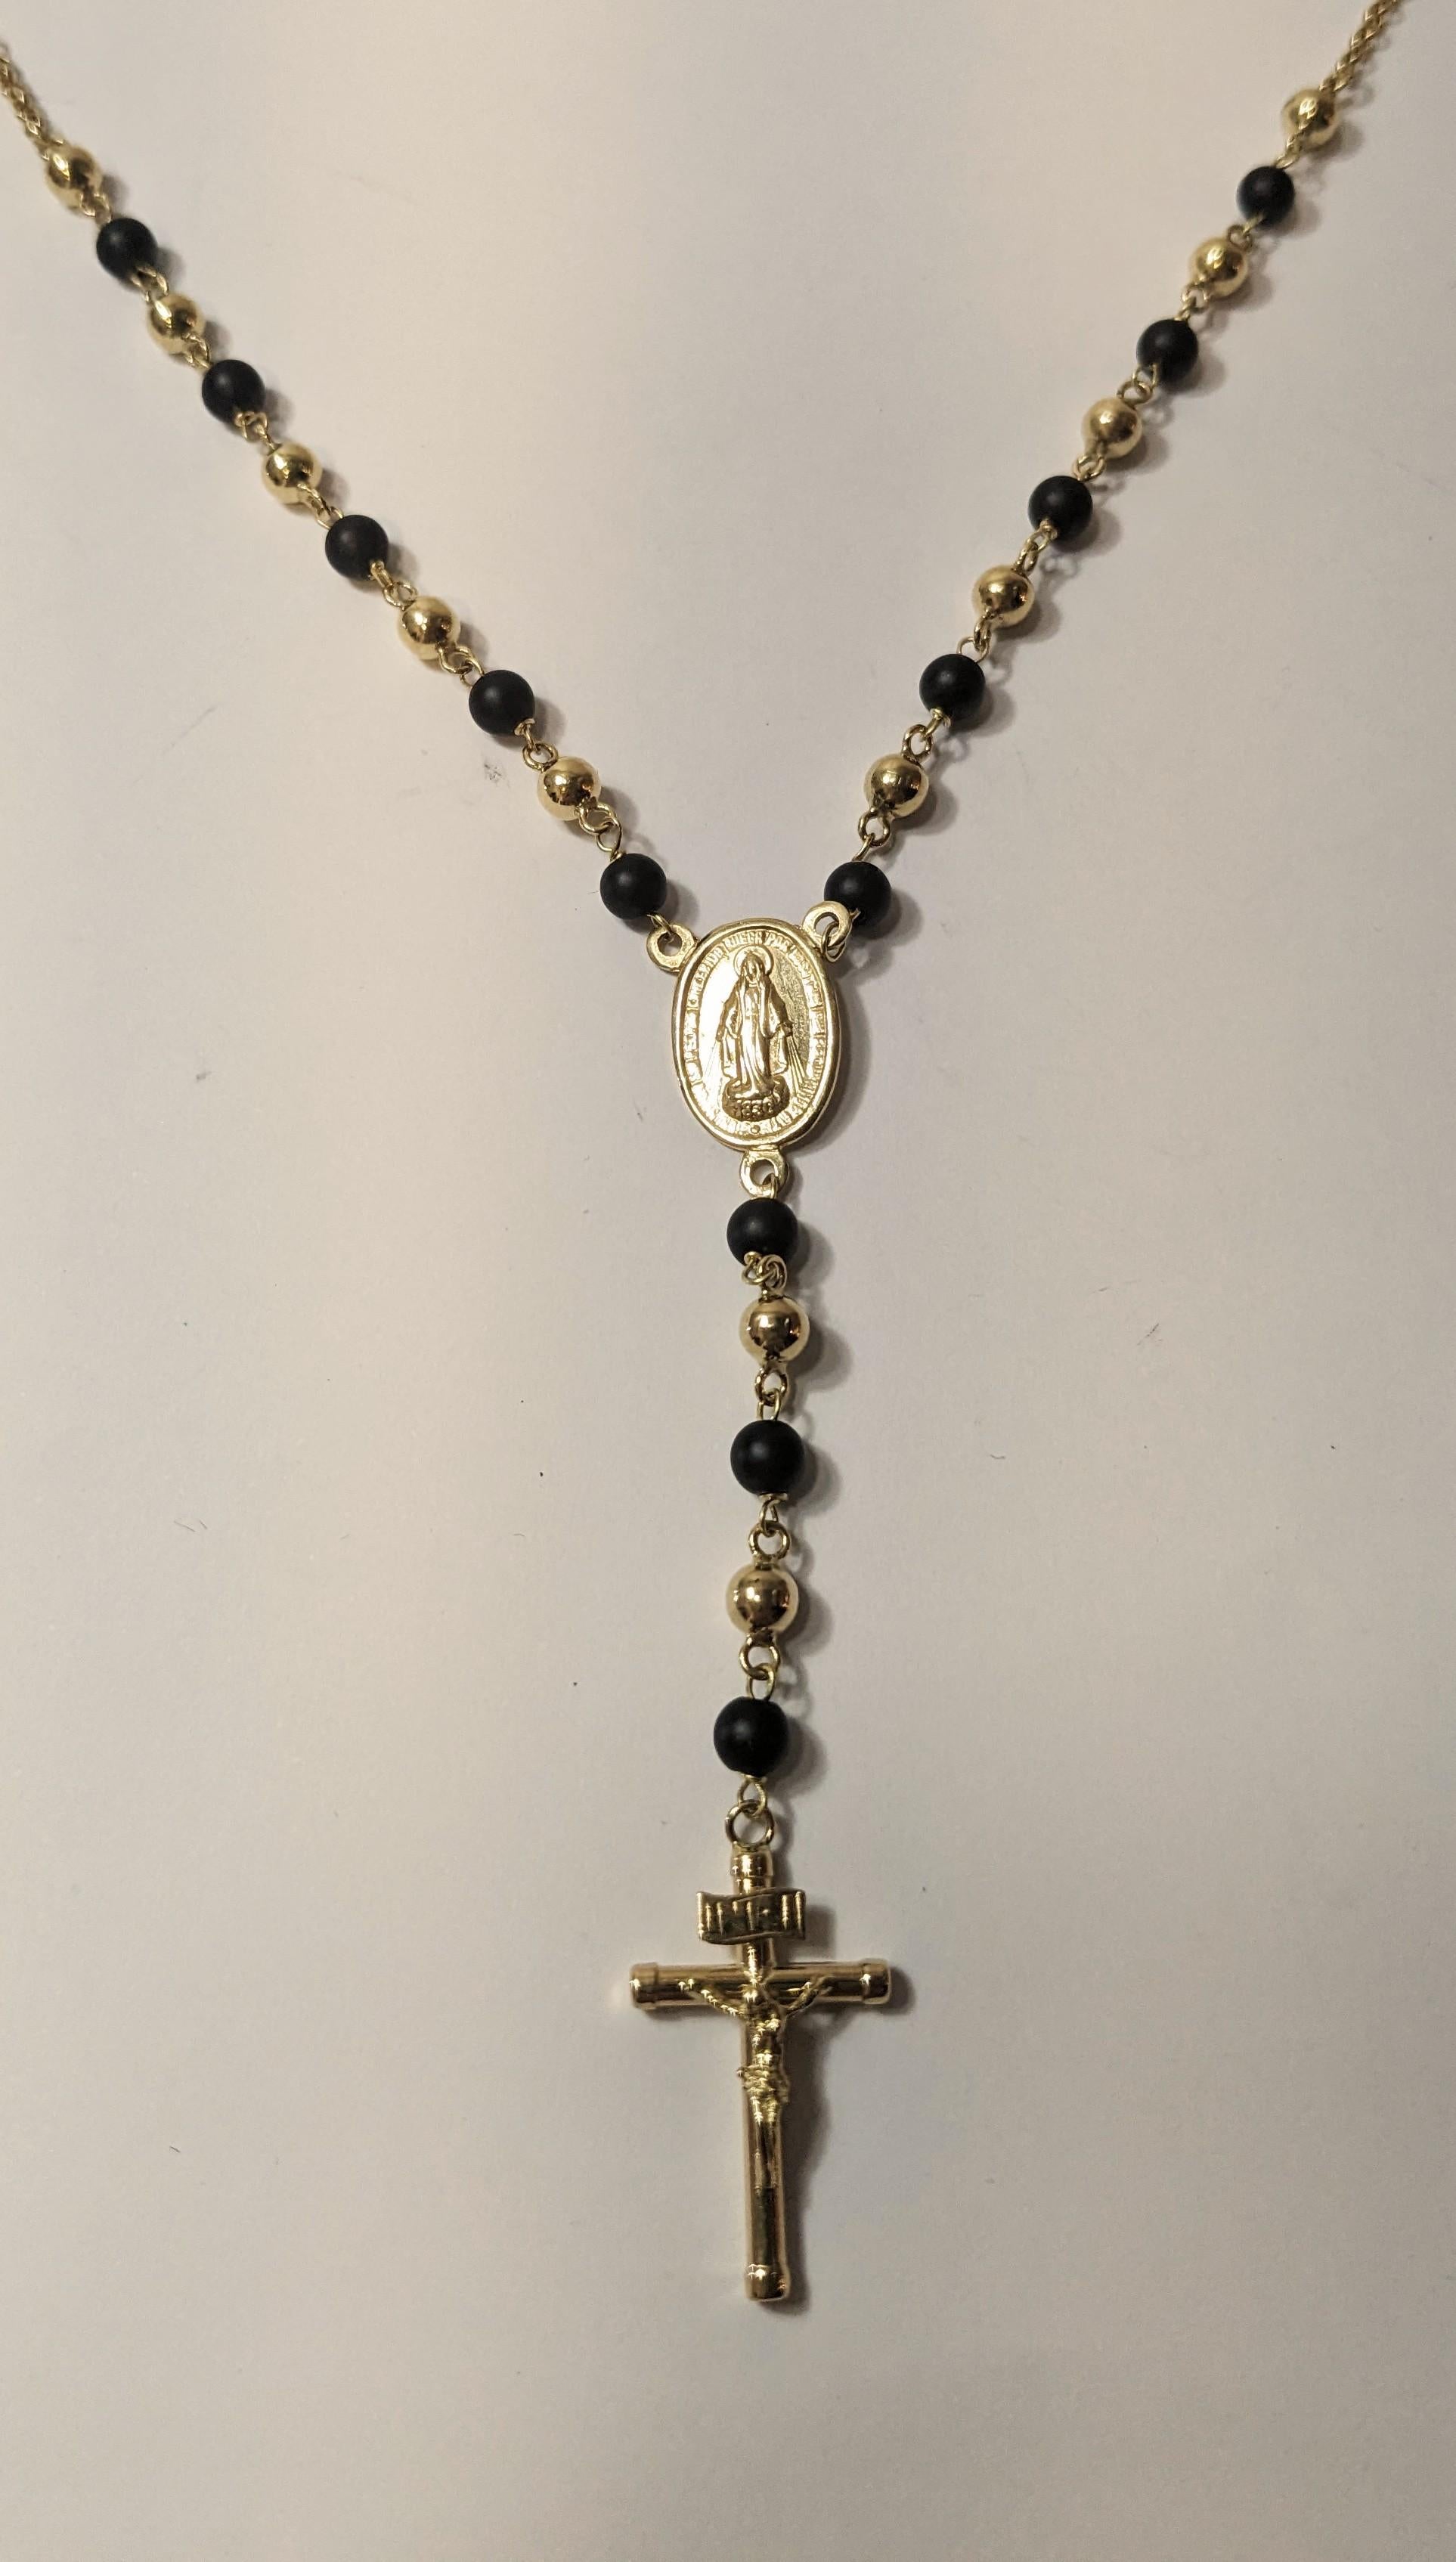 Rosary Necklace in 18K Gold and Onyx
 Rosary Necklace Unisex Woman Man with Virgin Mary Miraculous Medal and Cross
18kt rose gold with Onyx with brilliant and satin finish
Weight: grams 11
Length to virgin  30cm  
Length from the Virgin to the Cross